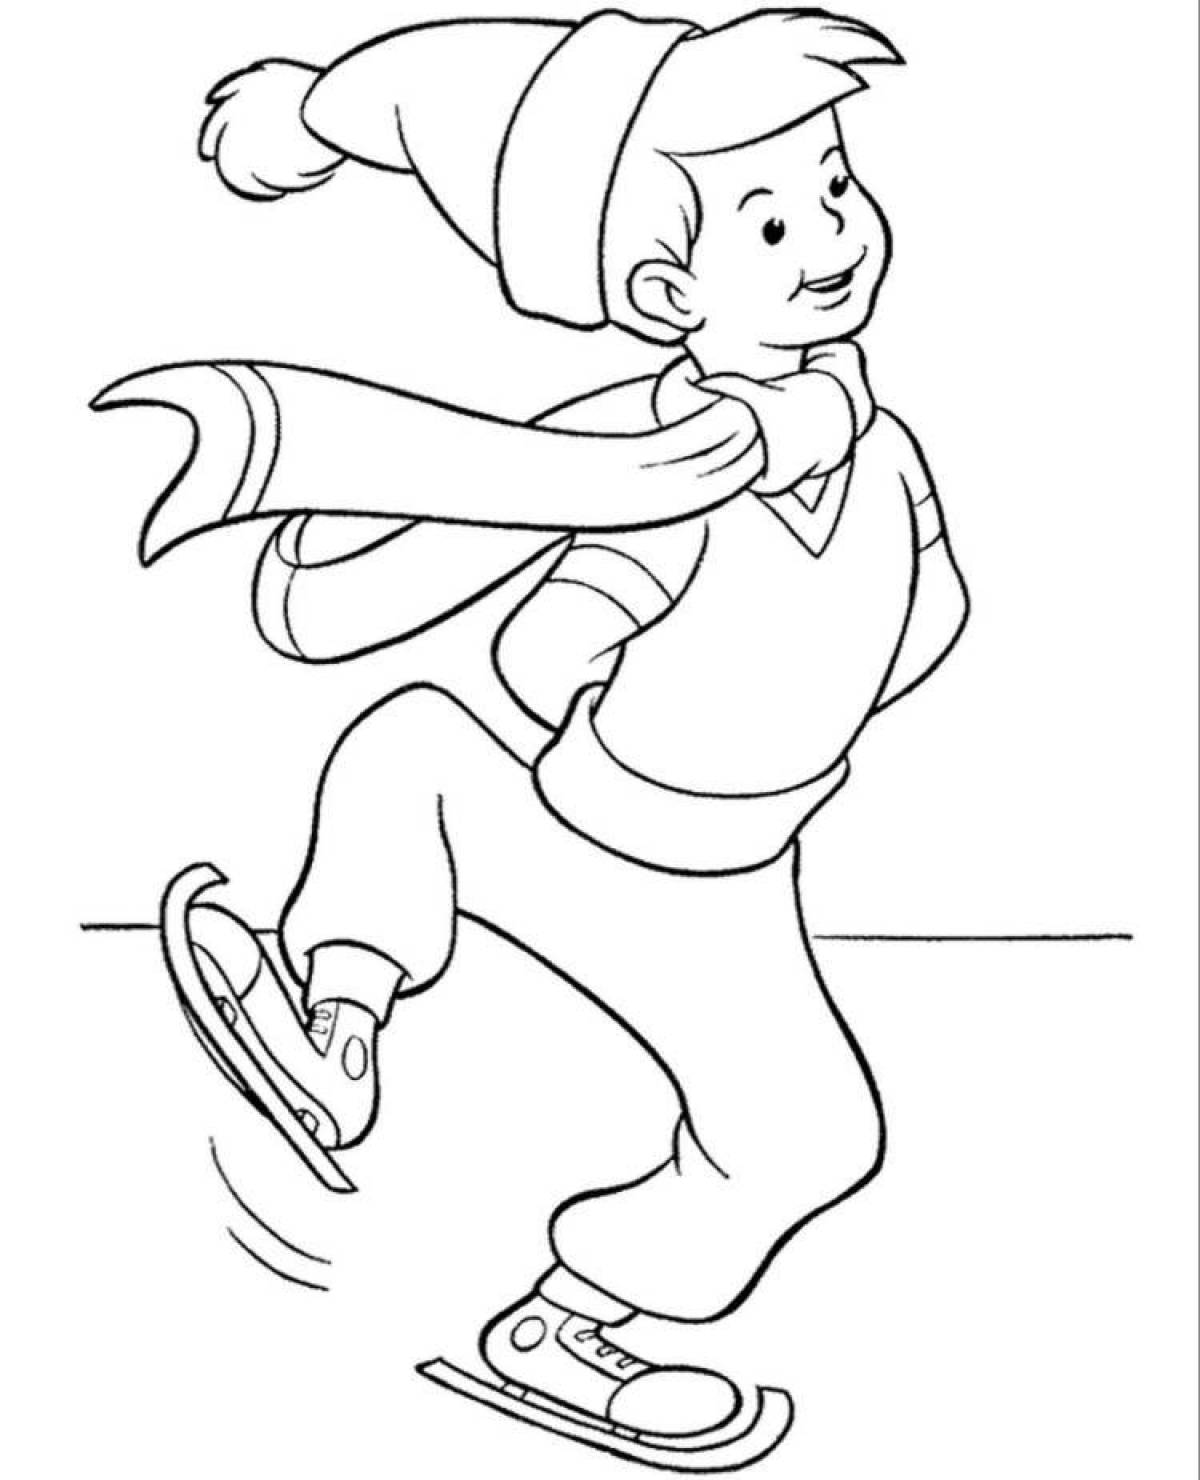 Sparkling ice skating coloring page